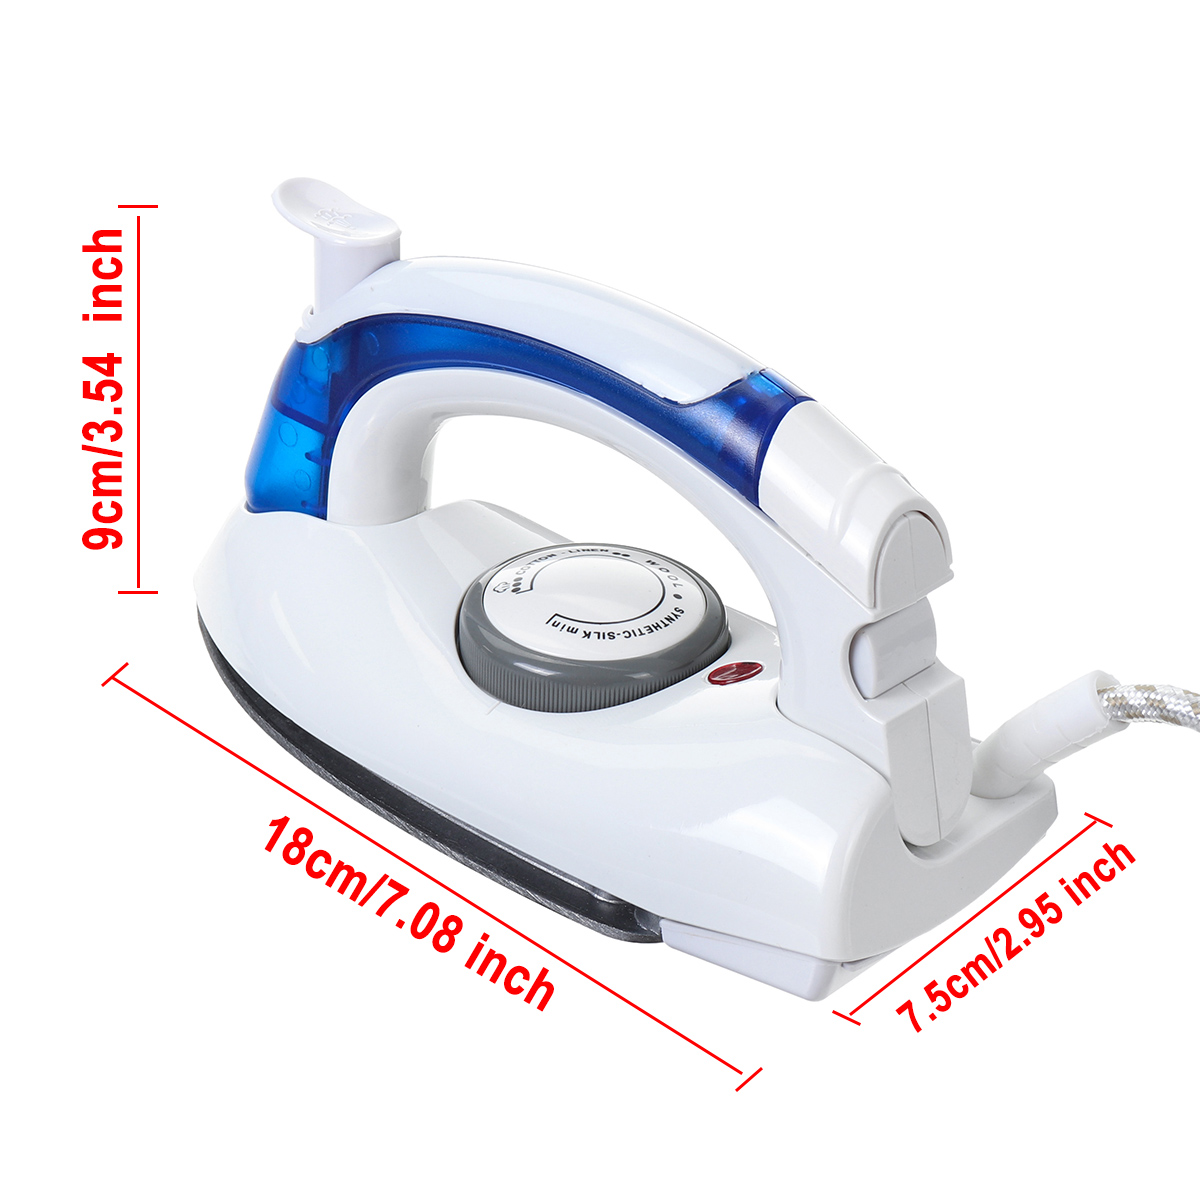 700W-Portable-Handheld-Foldable-Electric-Steam-Iron-3-Gear-Fast-Heat-Up-Garment-Steamer-Wrinkle-Remo-1754049-12